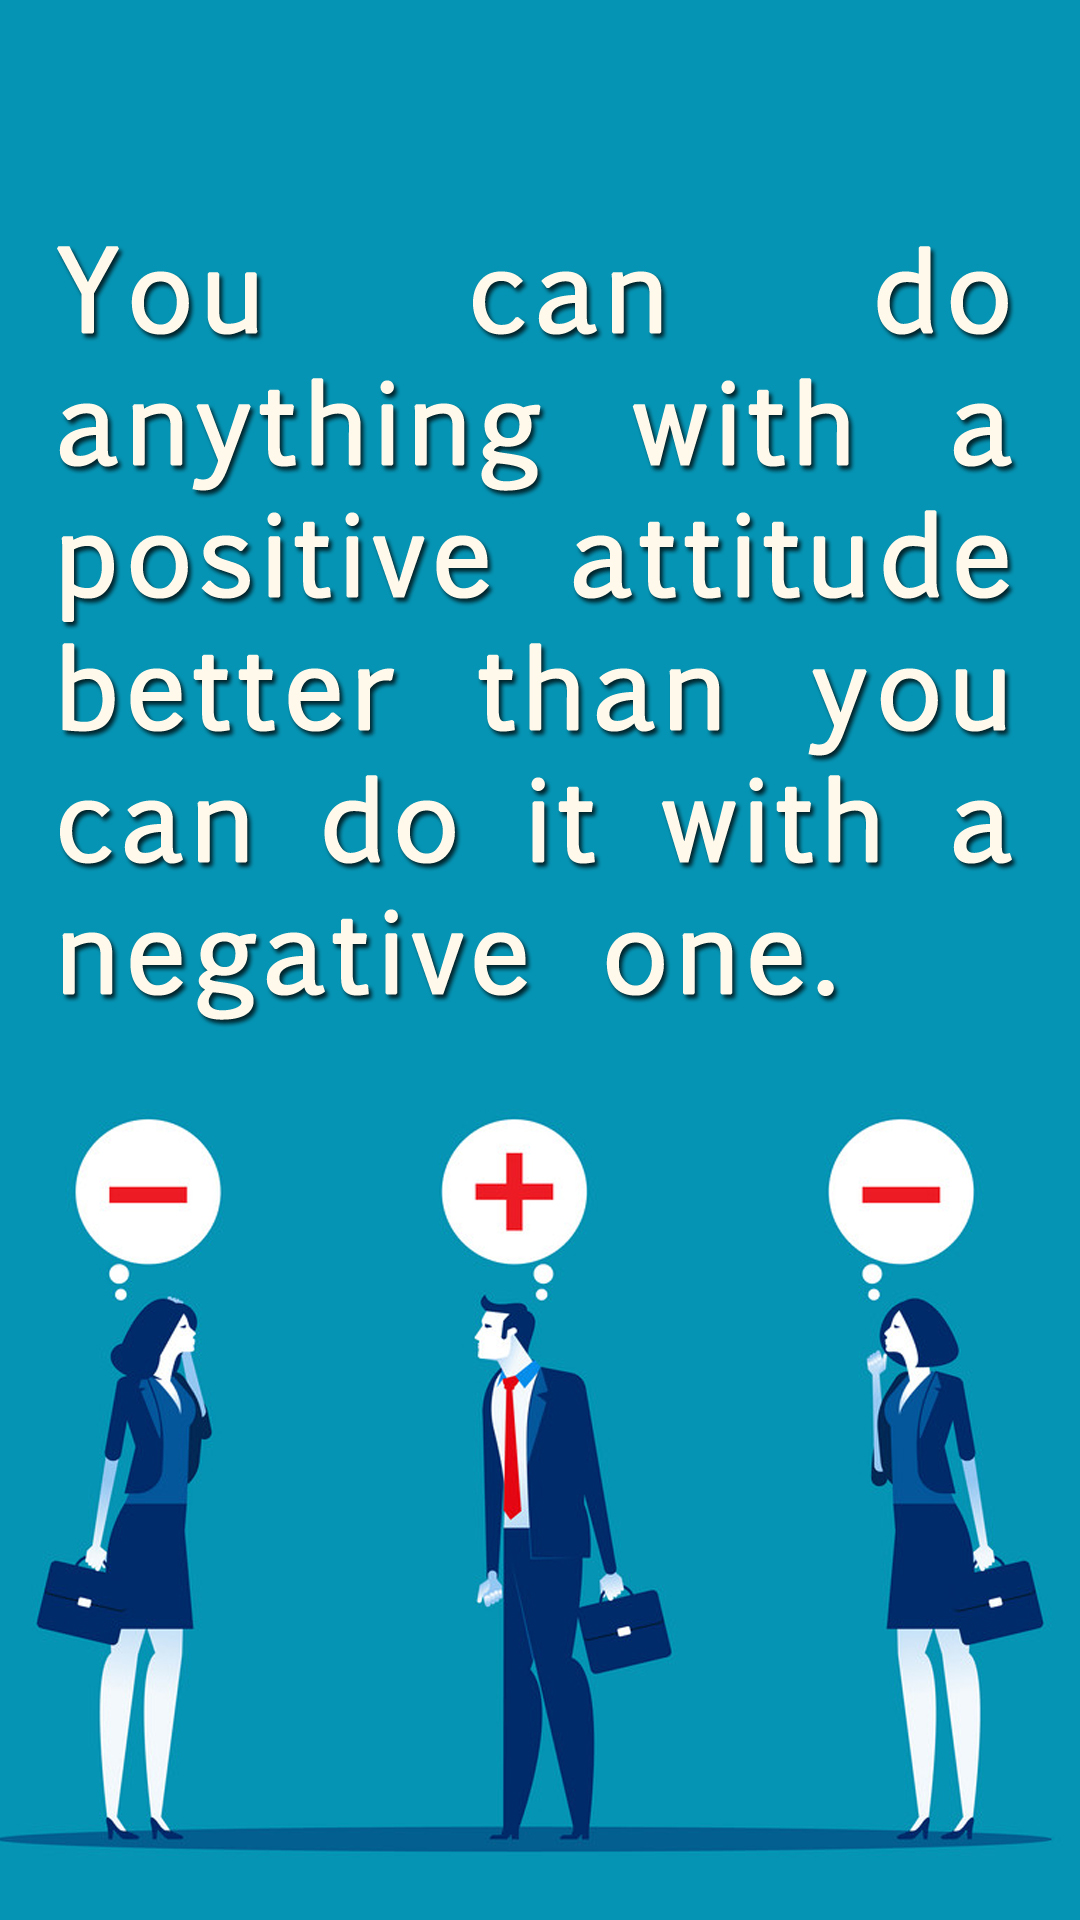 You can do anything with a positive attitude better than you can do it with a negative one.